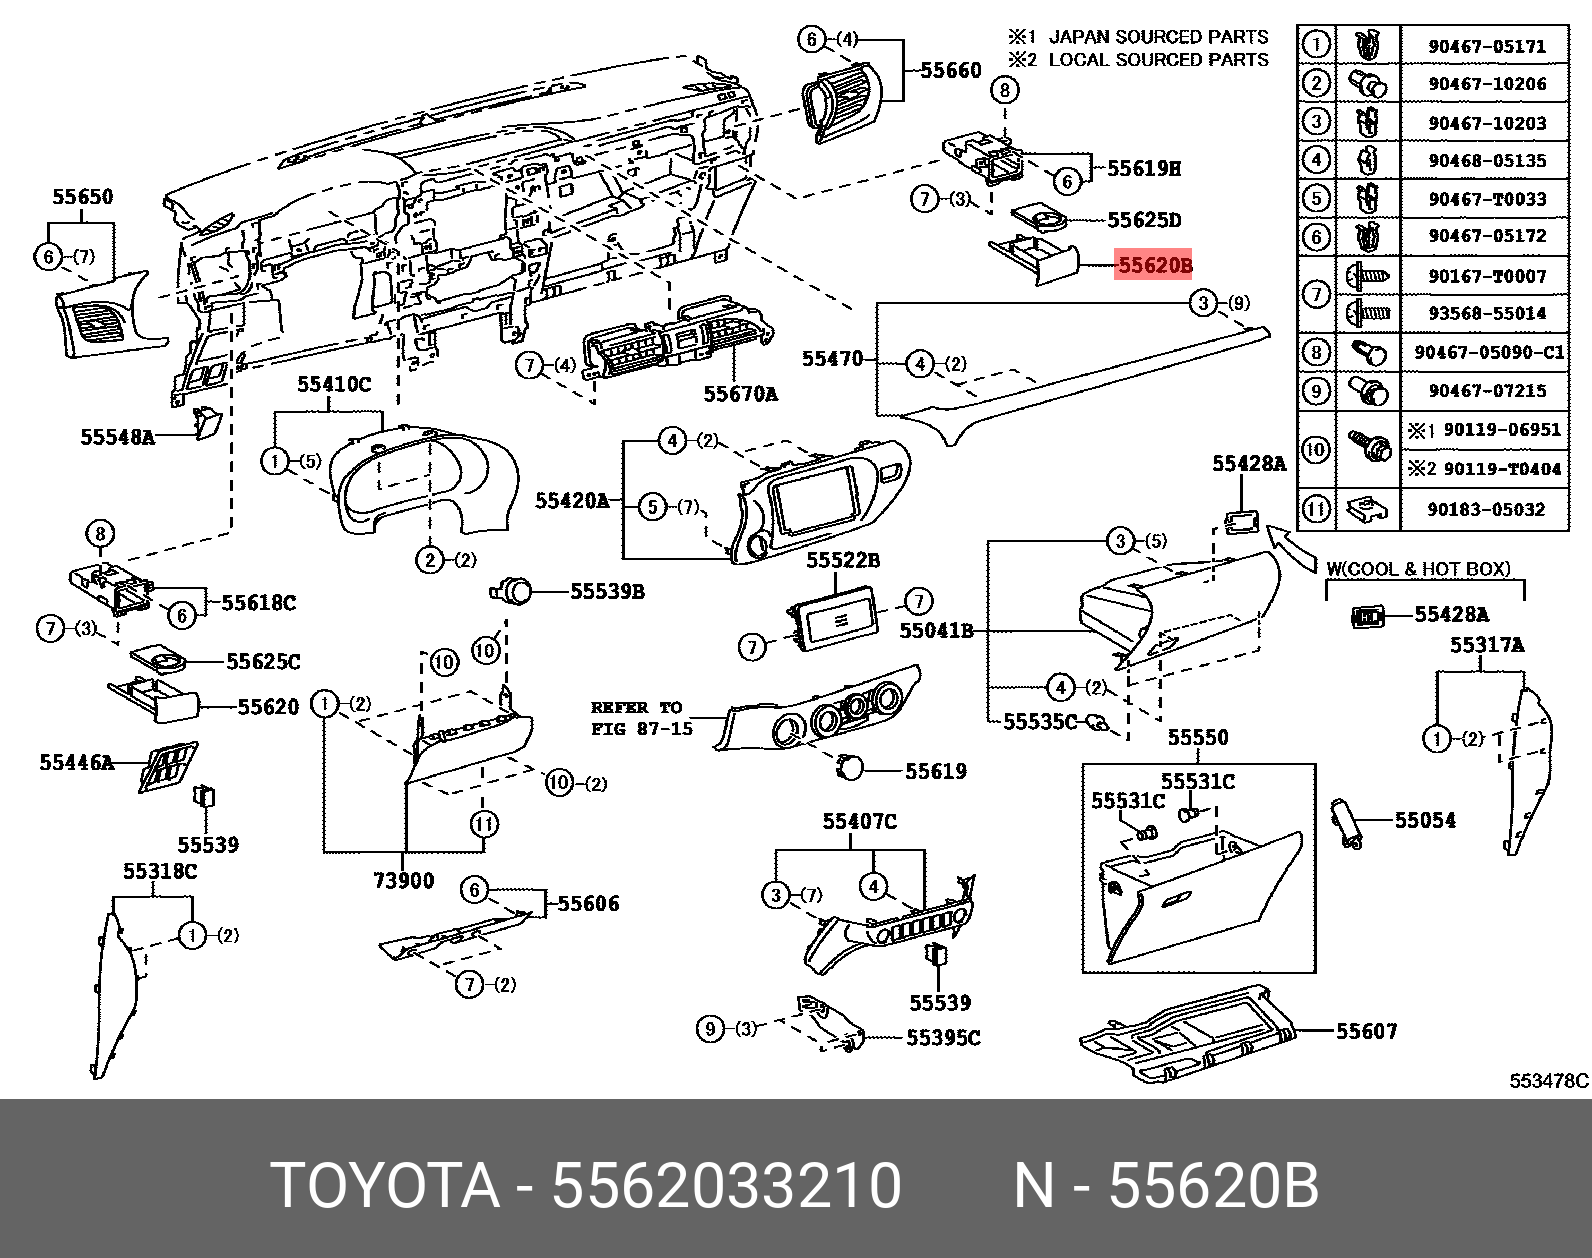 CAMRY 200601 - 201108, HOLDER, INSTRUMENT PANEL CUP